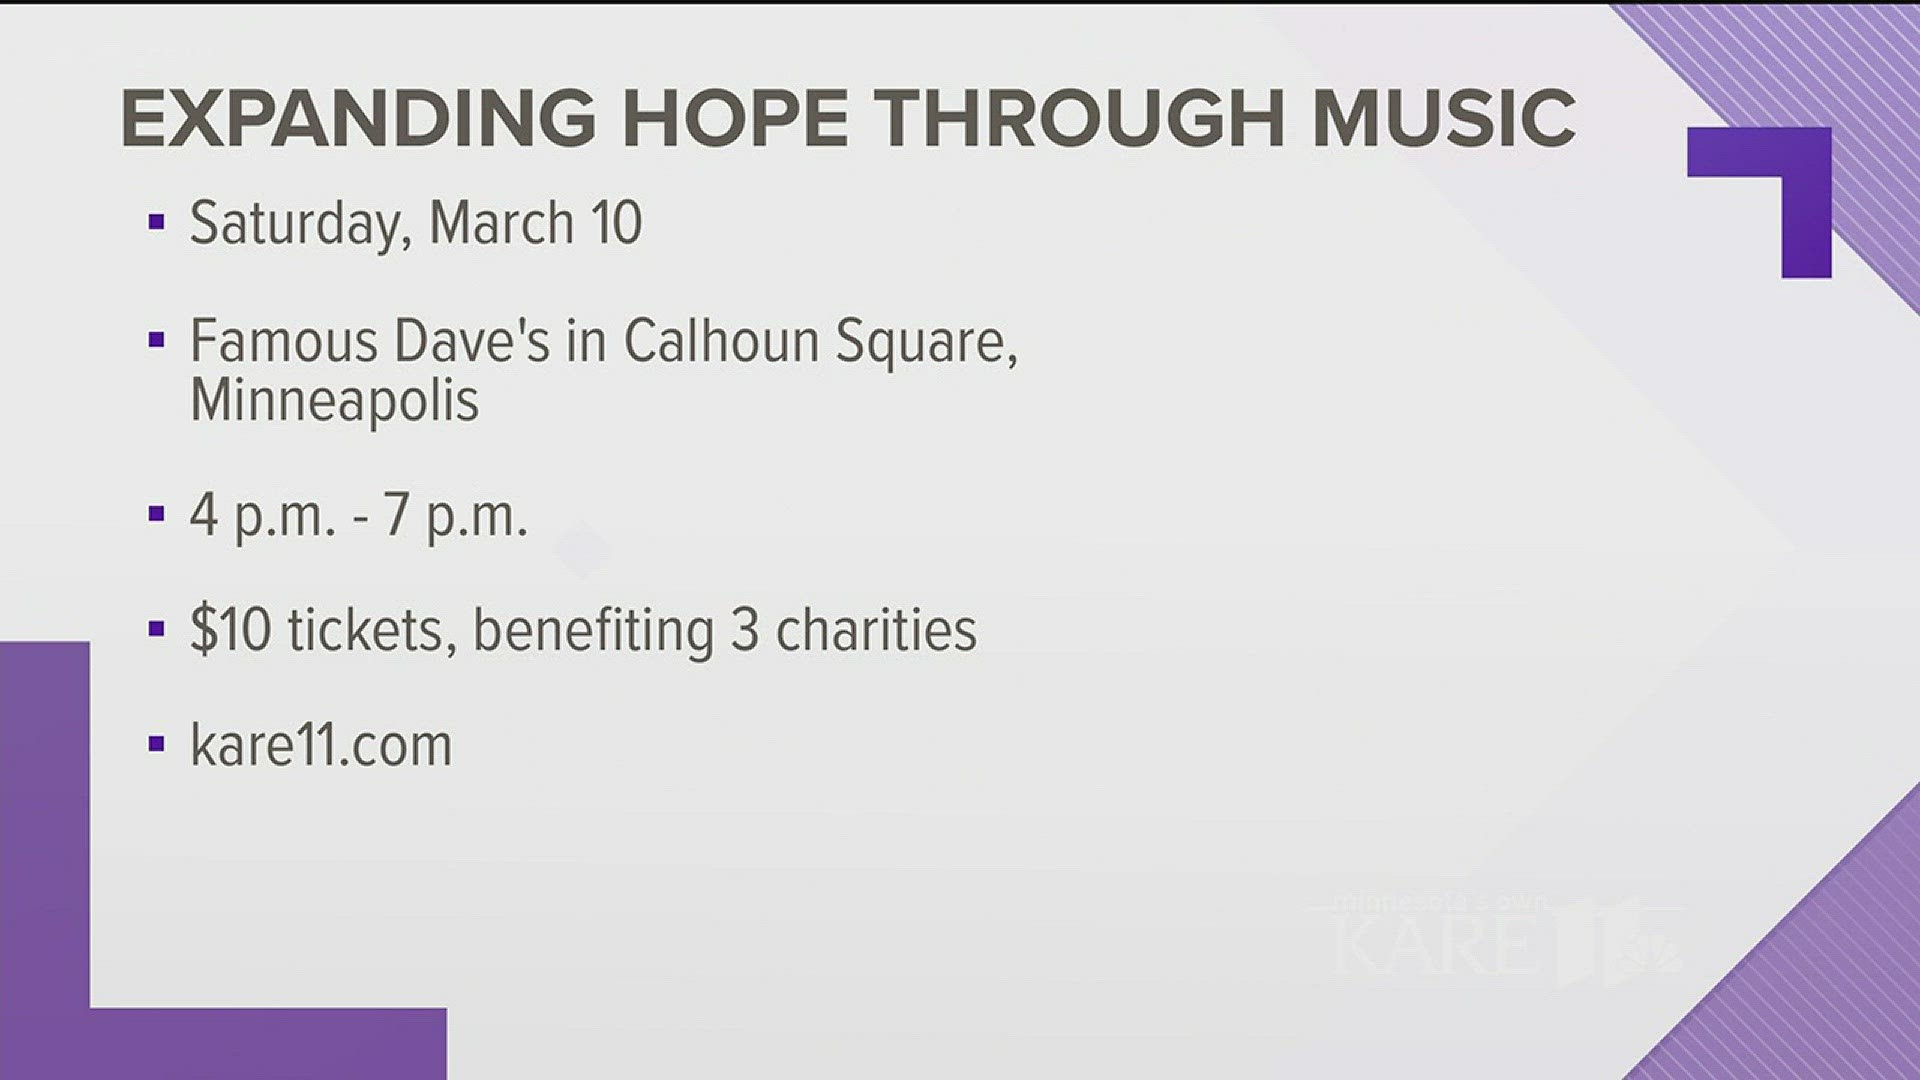 "Expanding Hope Through Music" is Saturday, March 10 from 4-7 p.m. at Famous Dave's in Calhoun Square. http://kare11.tv/2oV0f1F